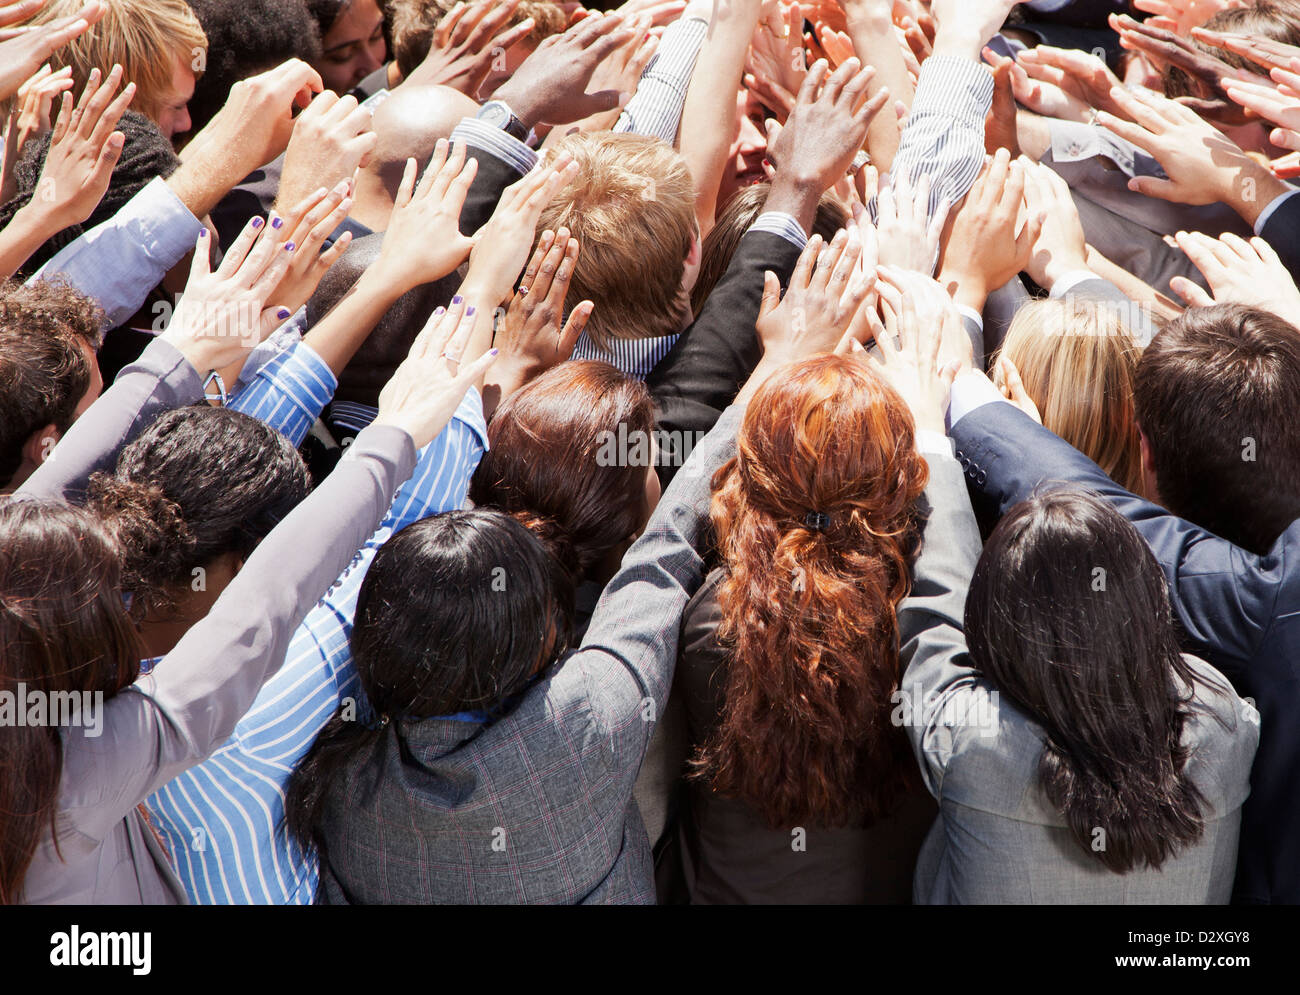 Crowd of business people reaching Stock Photo